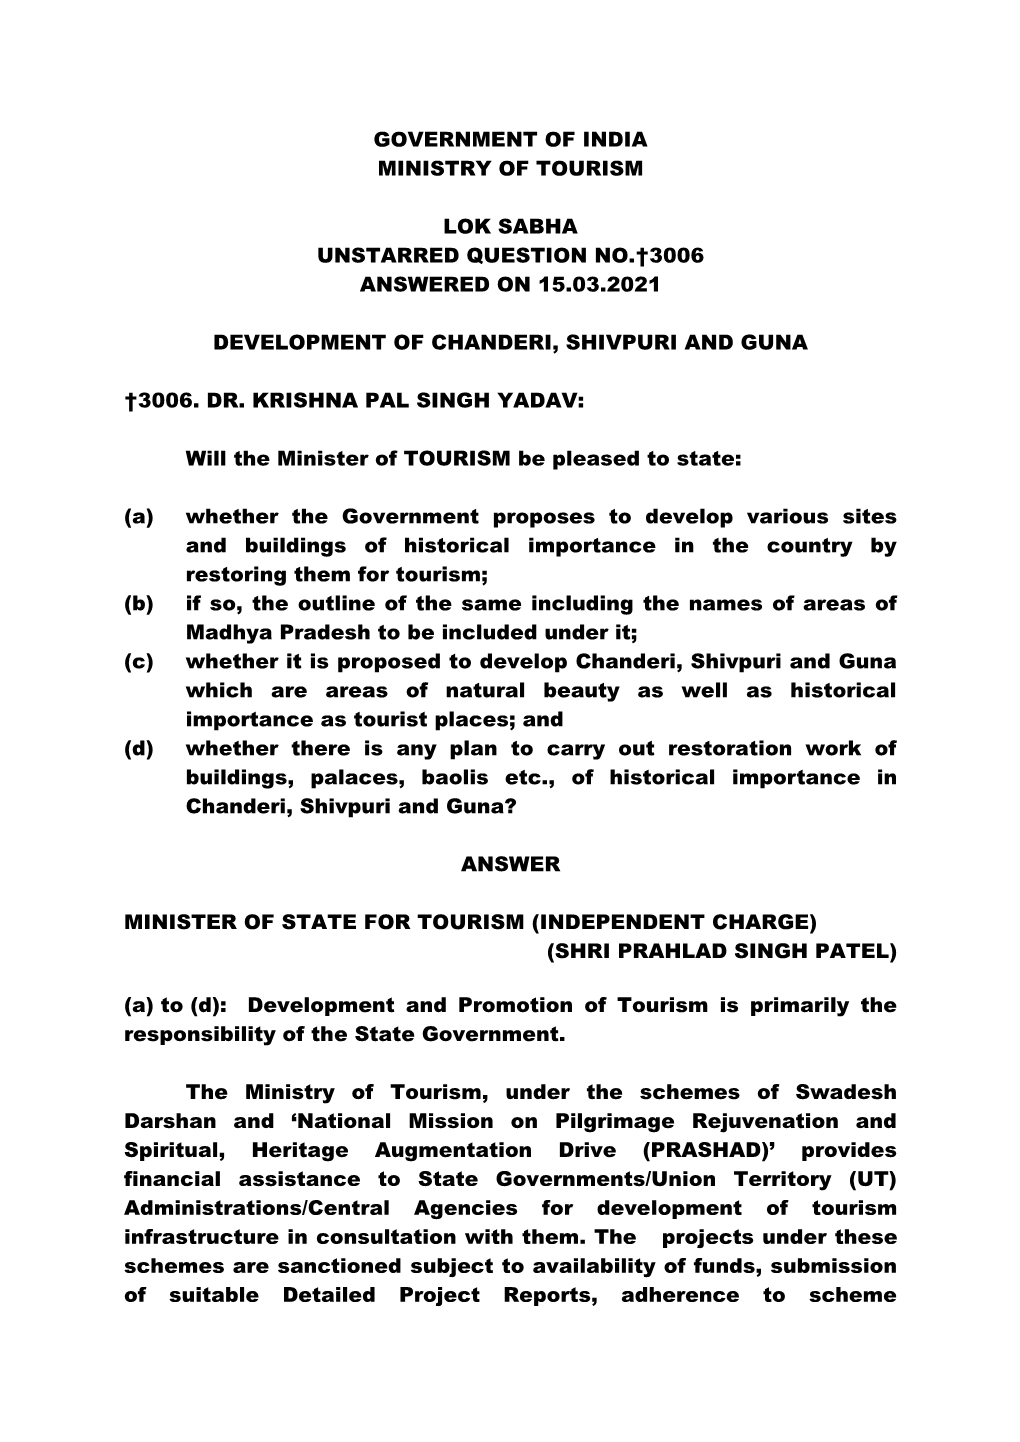 Government of India Ministry of Tourism Lok Sabha Unstarred Question No.†3006 Answered on 15.03.2021 Development of Chanderi